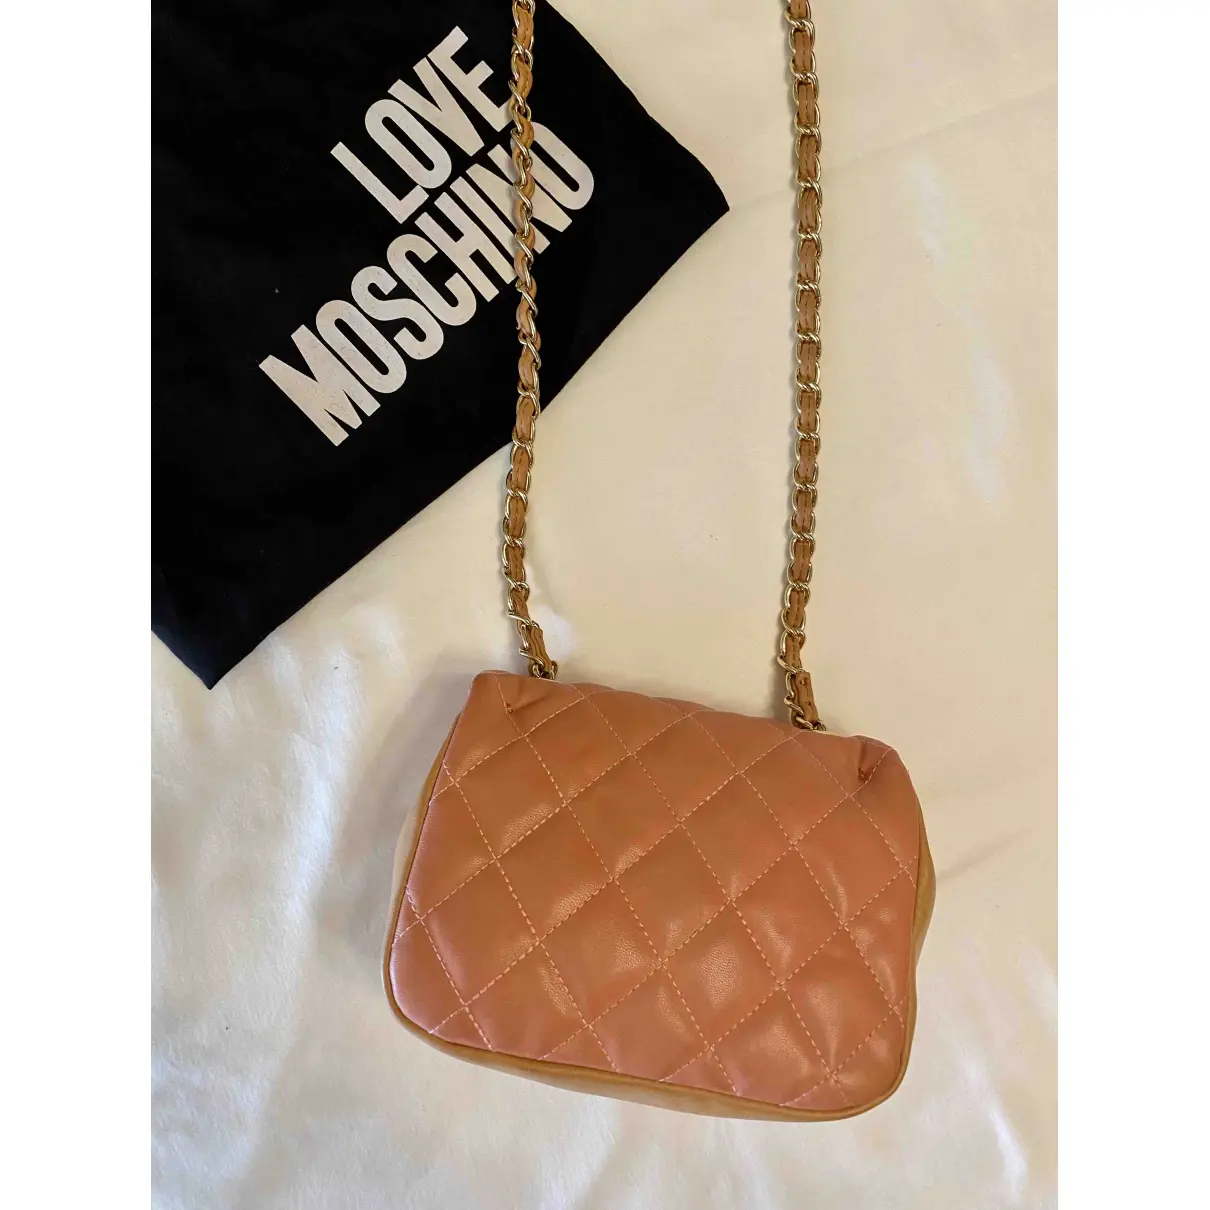 Buy Moschino Love Leather clutch bag online